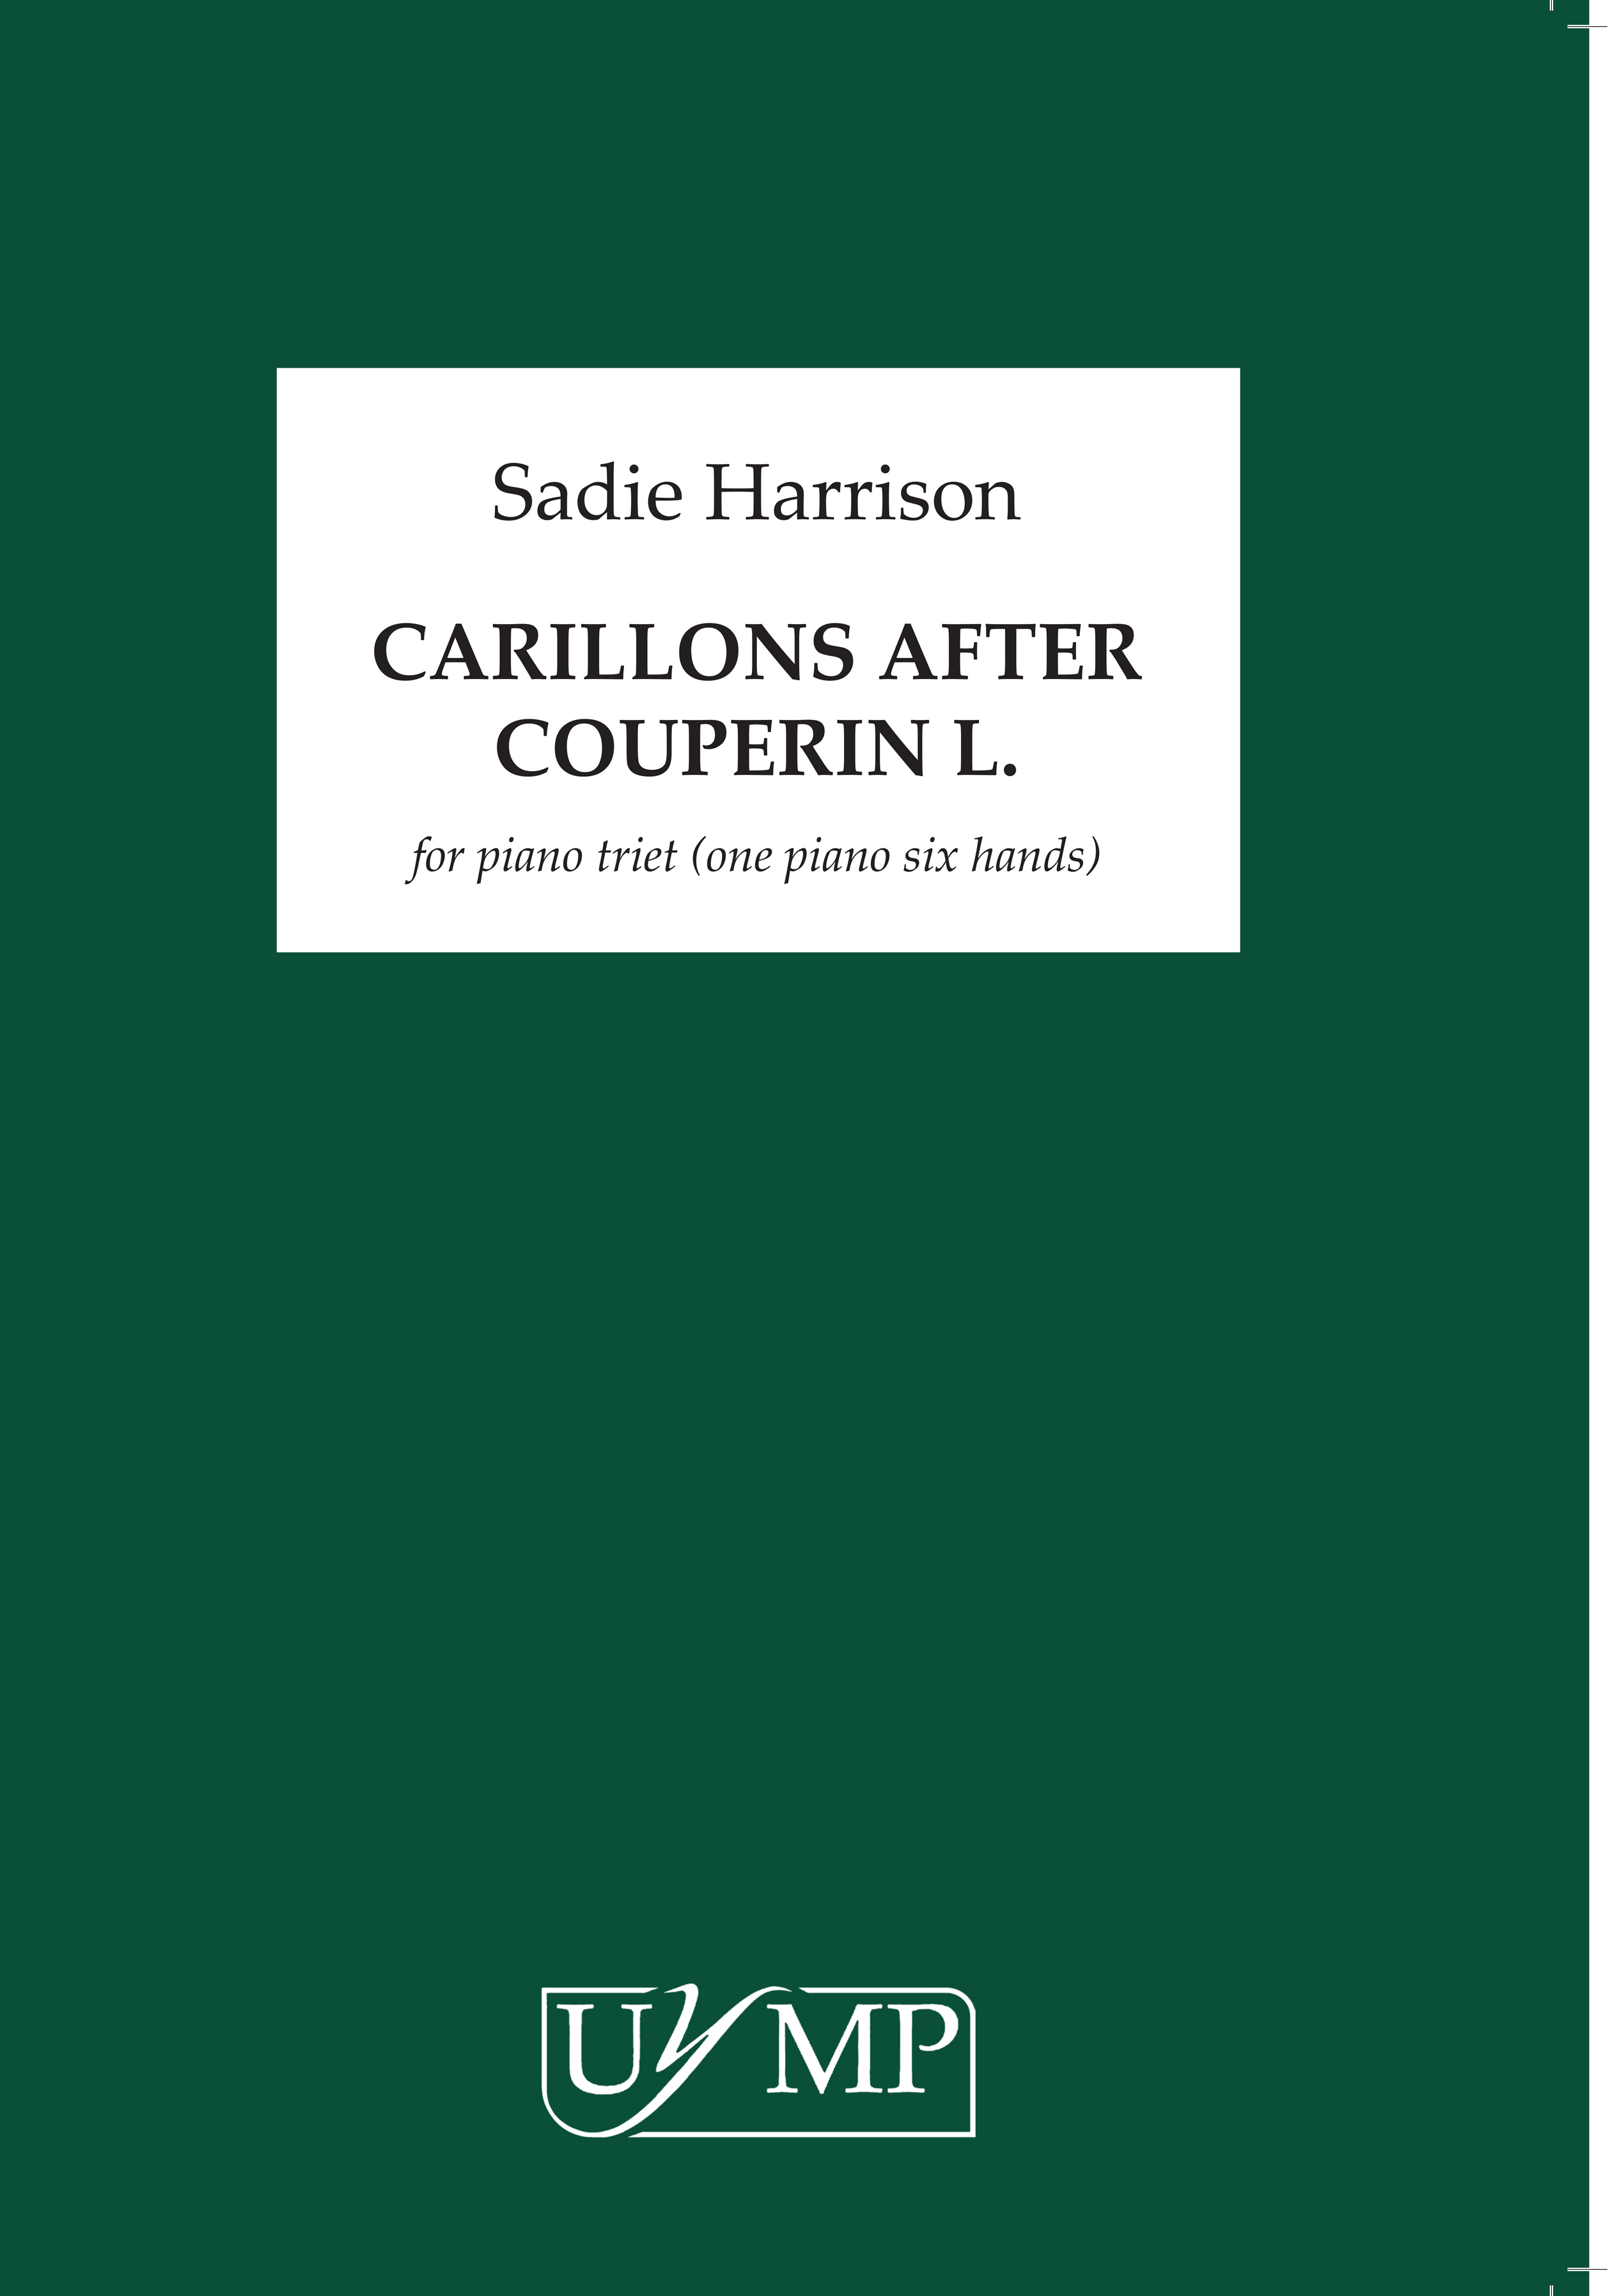 Sadie Harrison: Carillons after Couperin: Piano: Score